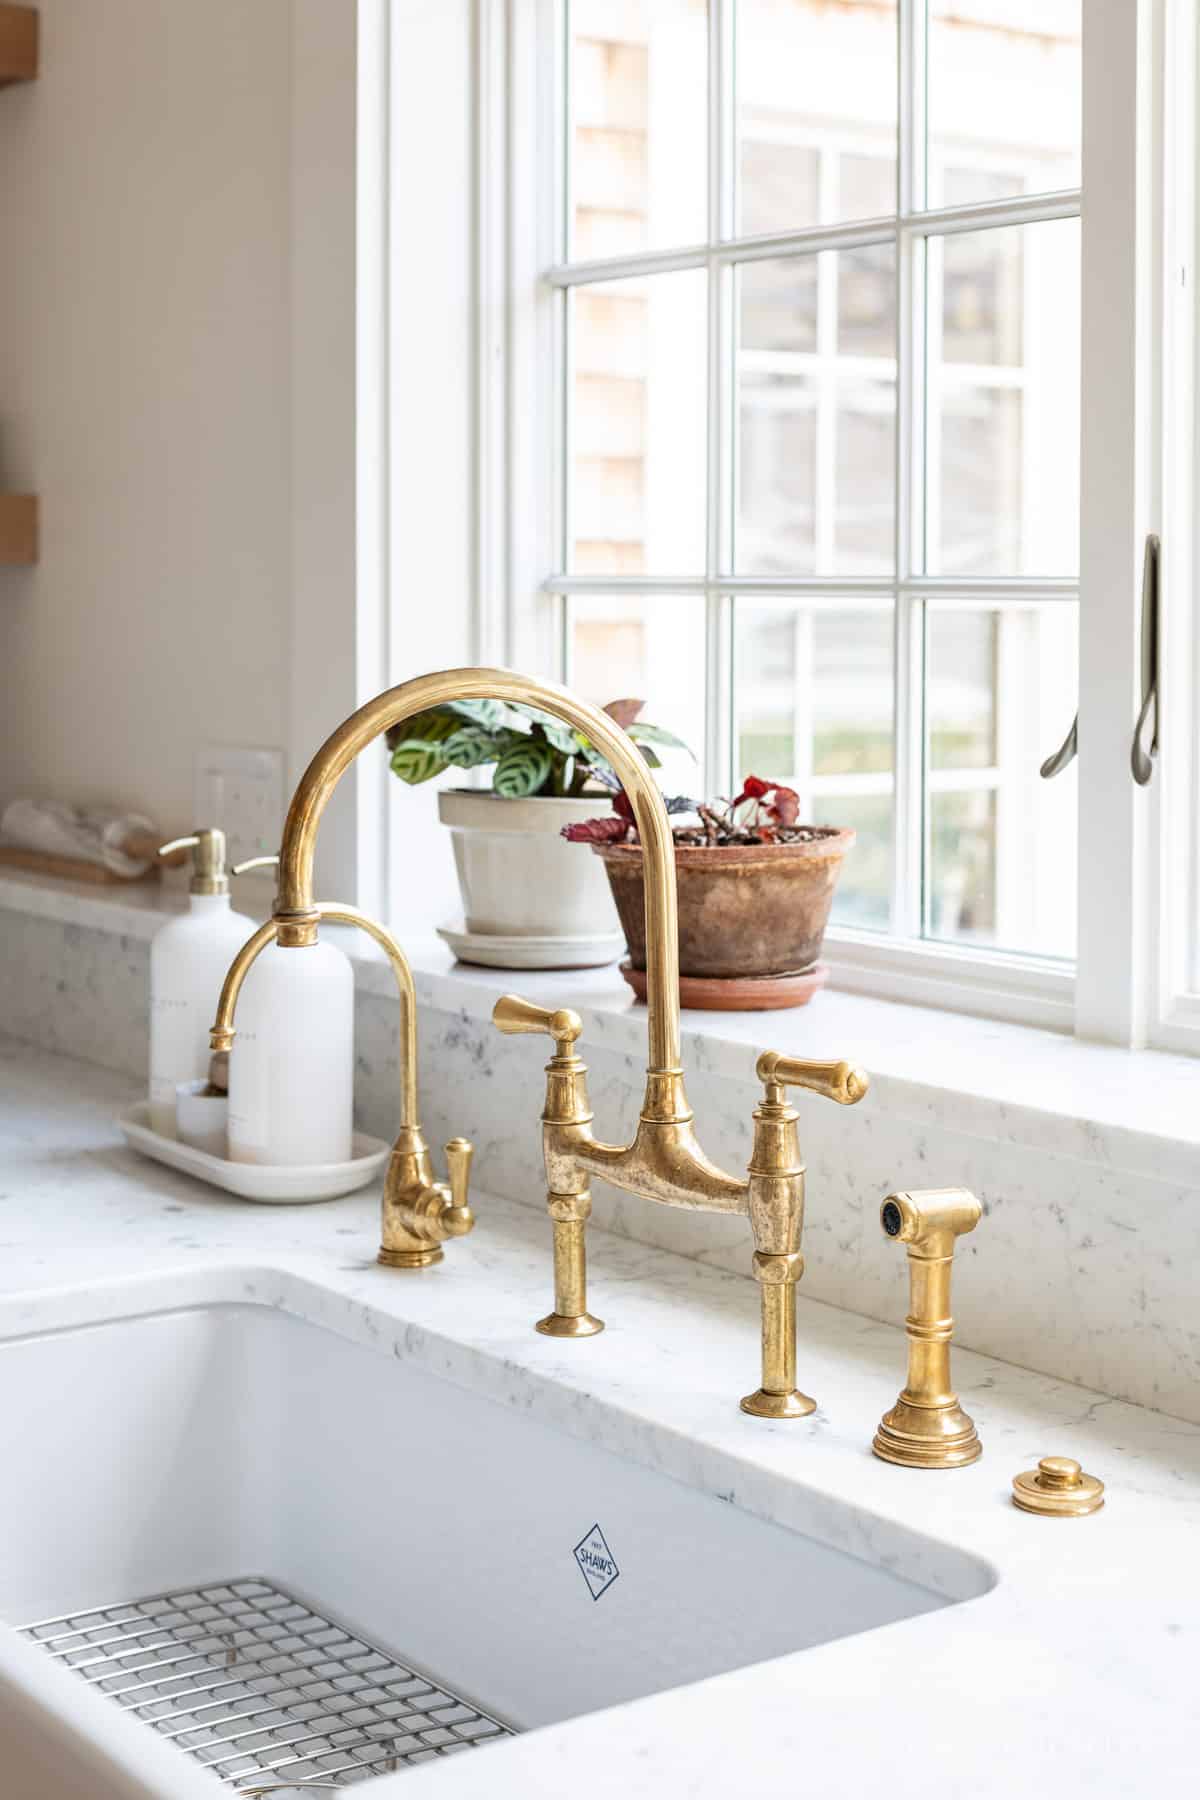 Unlacquered brass faucet and a Shaws sink